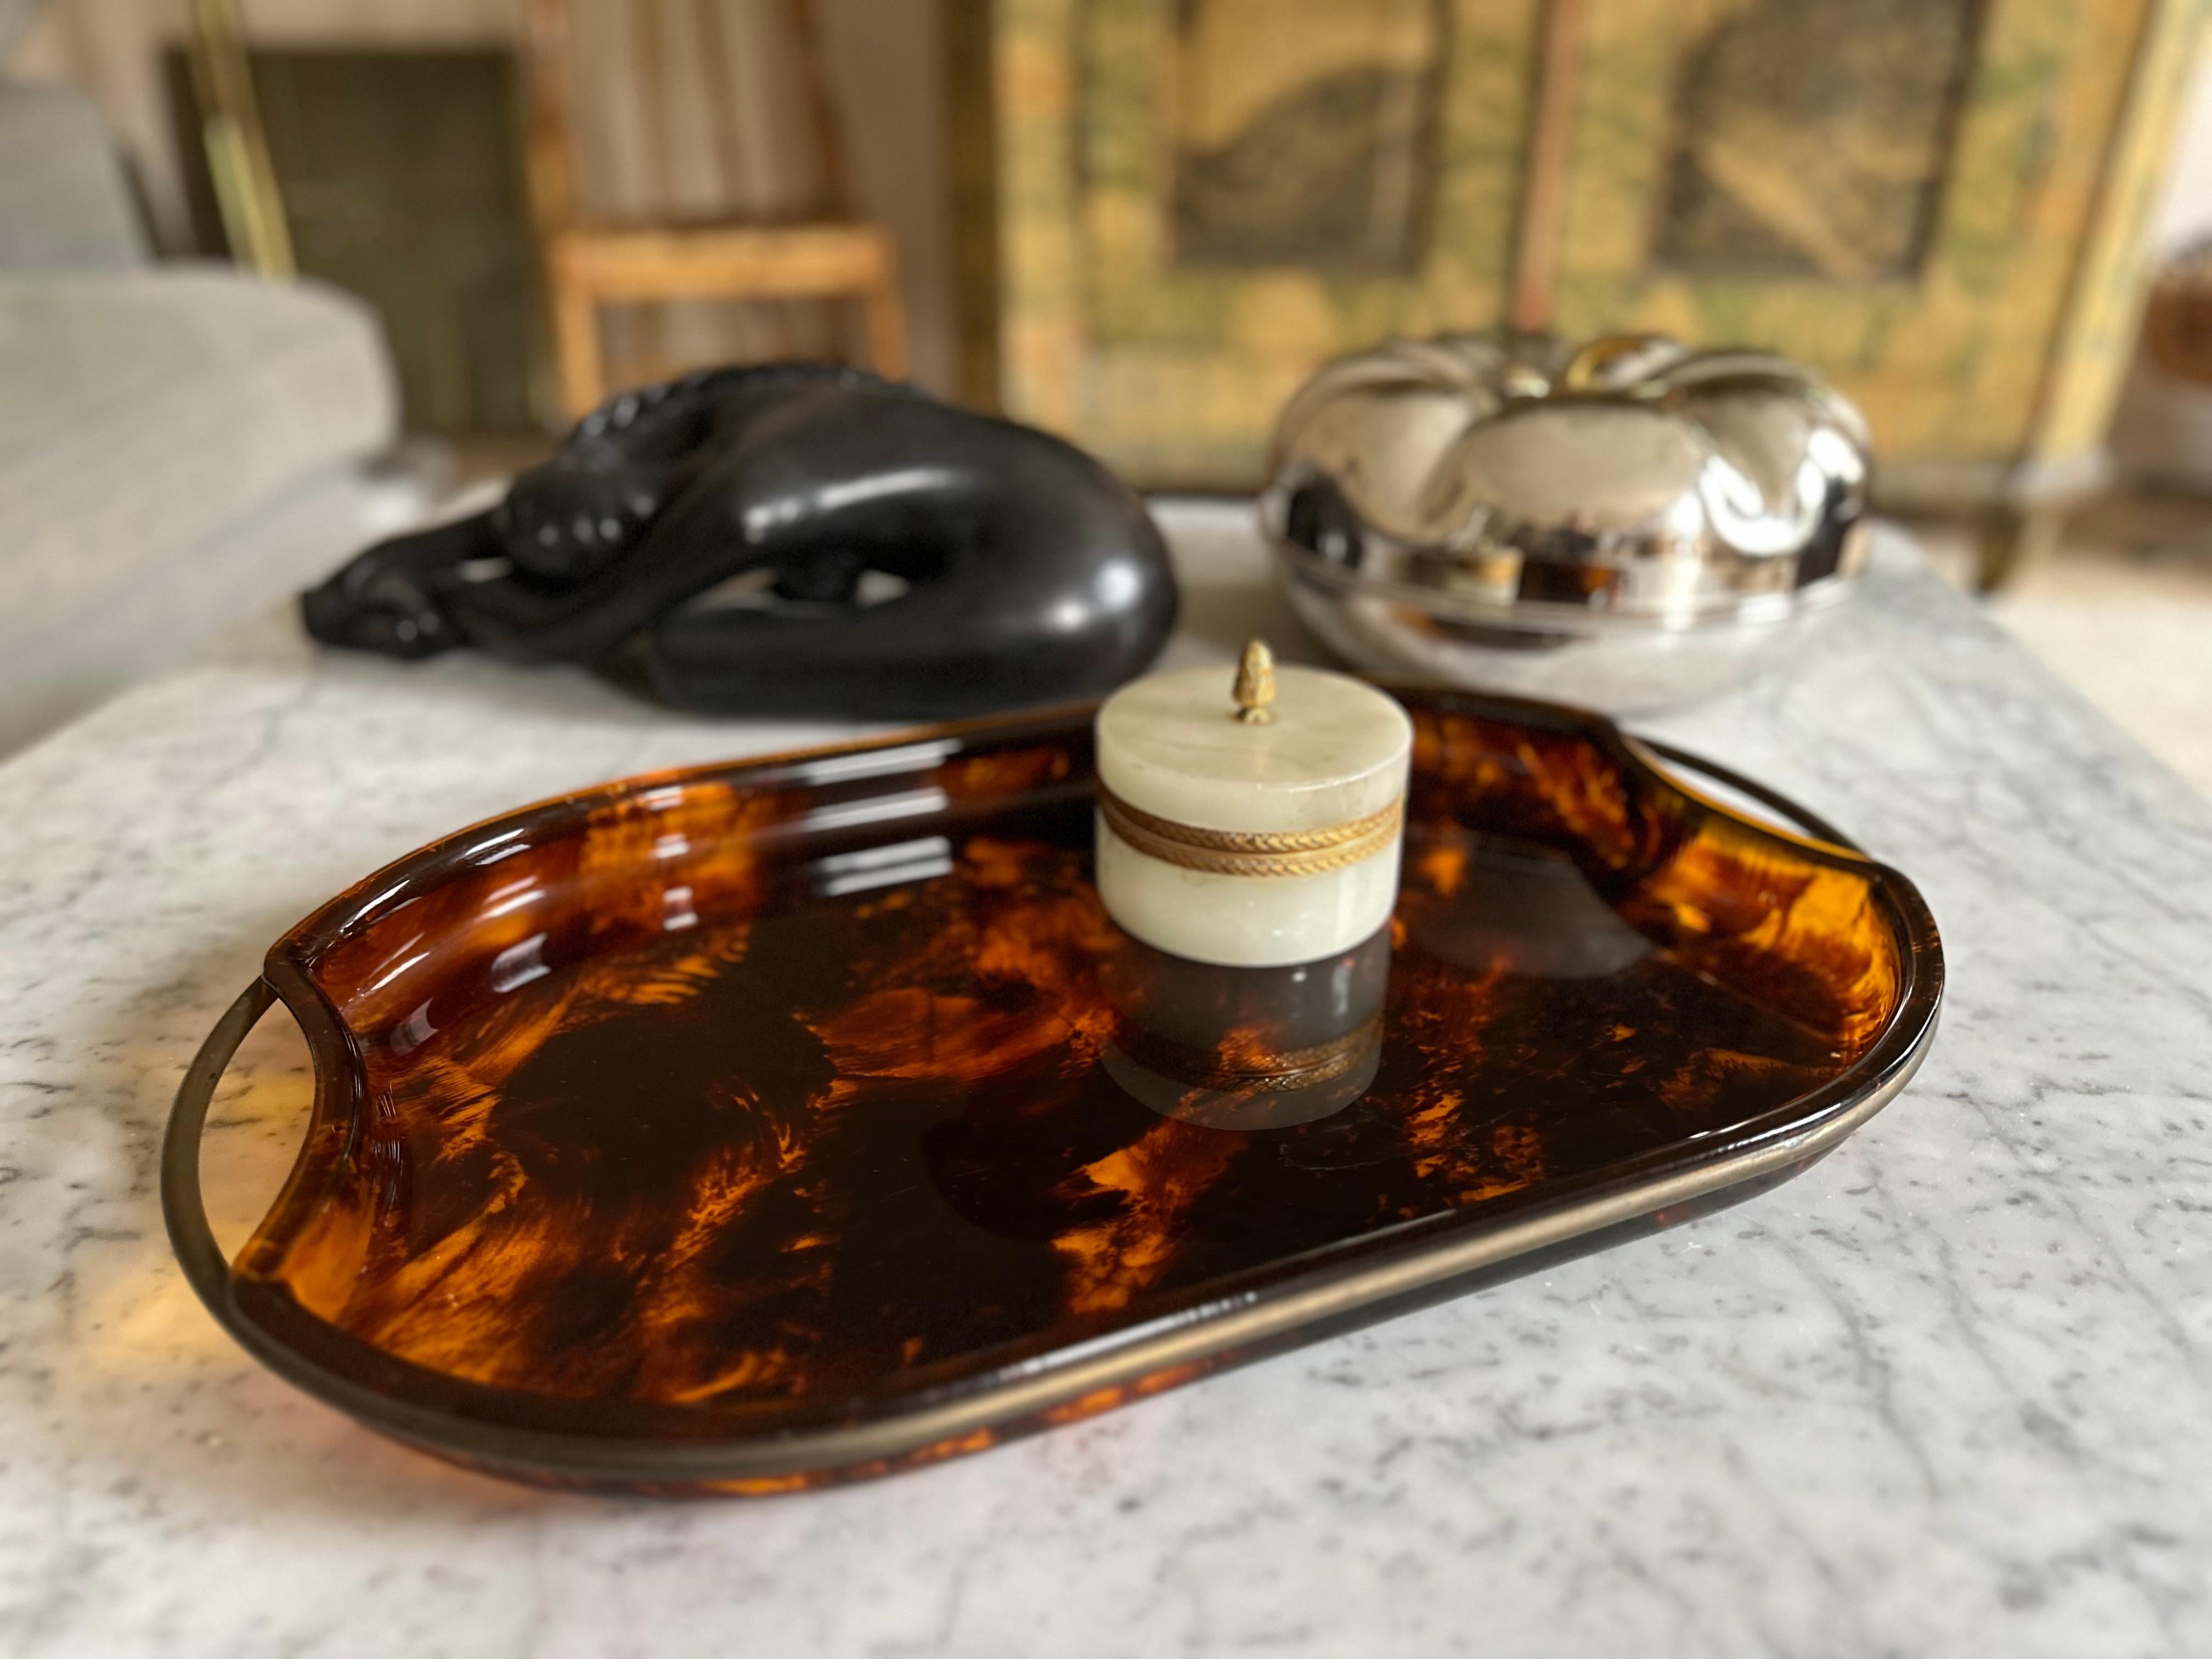  Guzzini’s Oval Lucite Serving Tray from 1970s Italy – Faux Tortoiseshell -brass For Sale 12